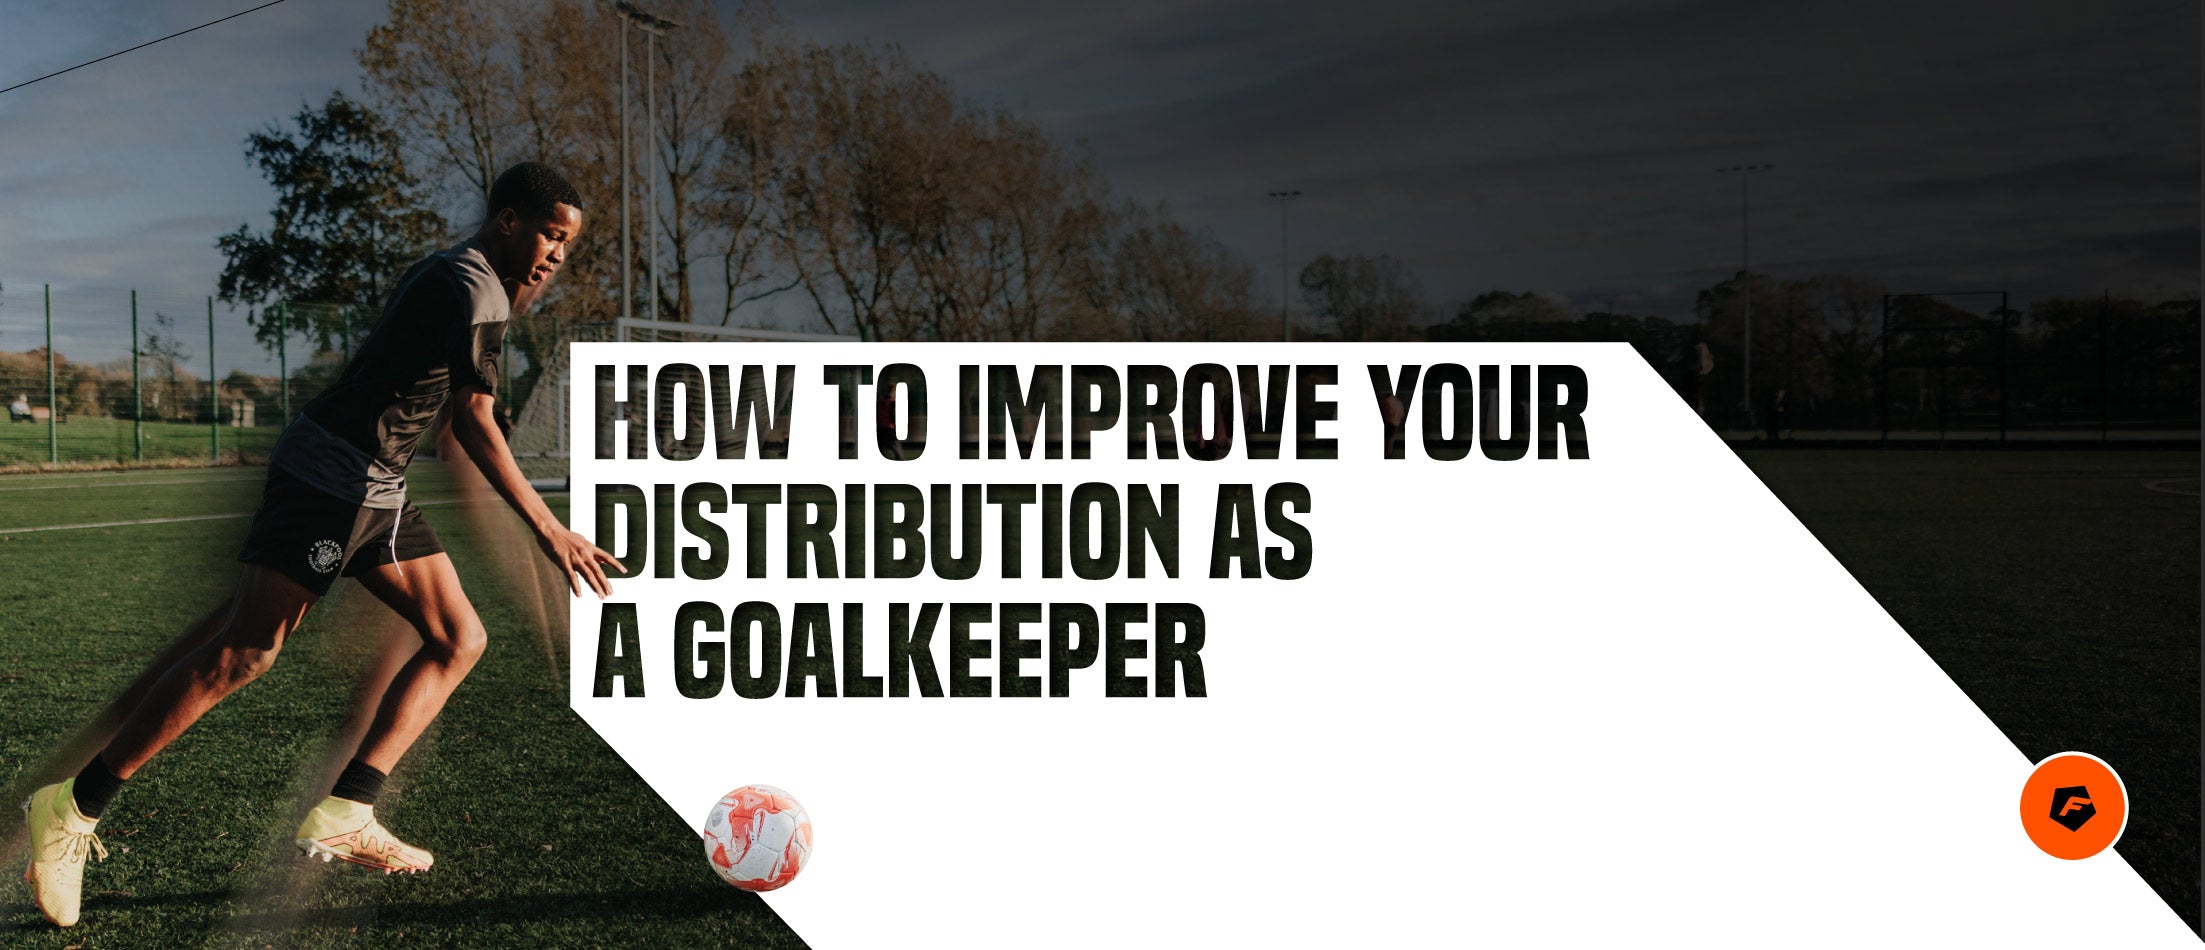 How to improve your distribution as a goalkeeper